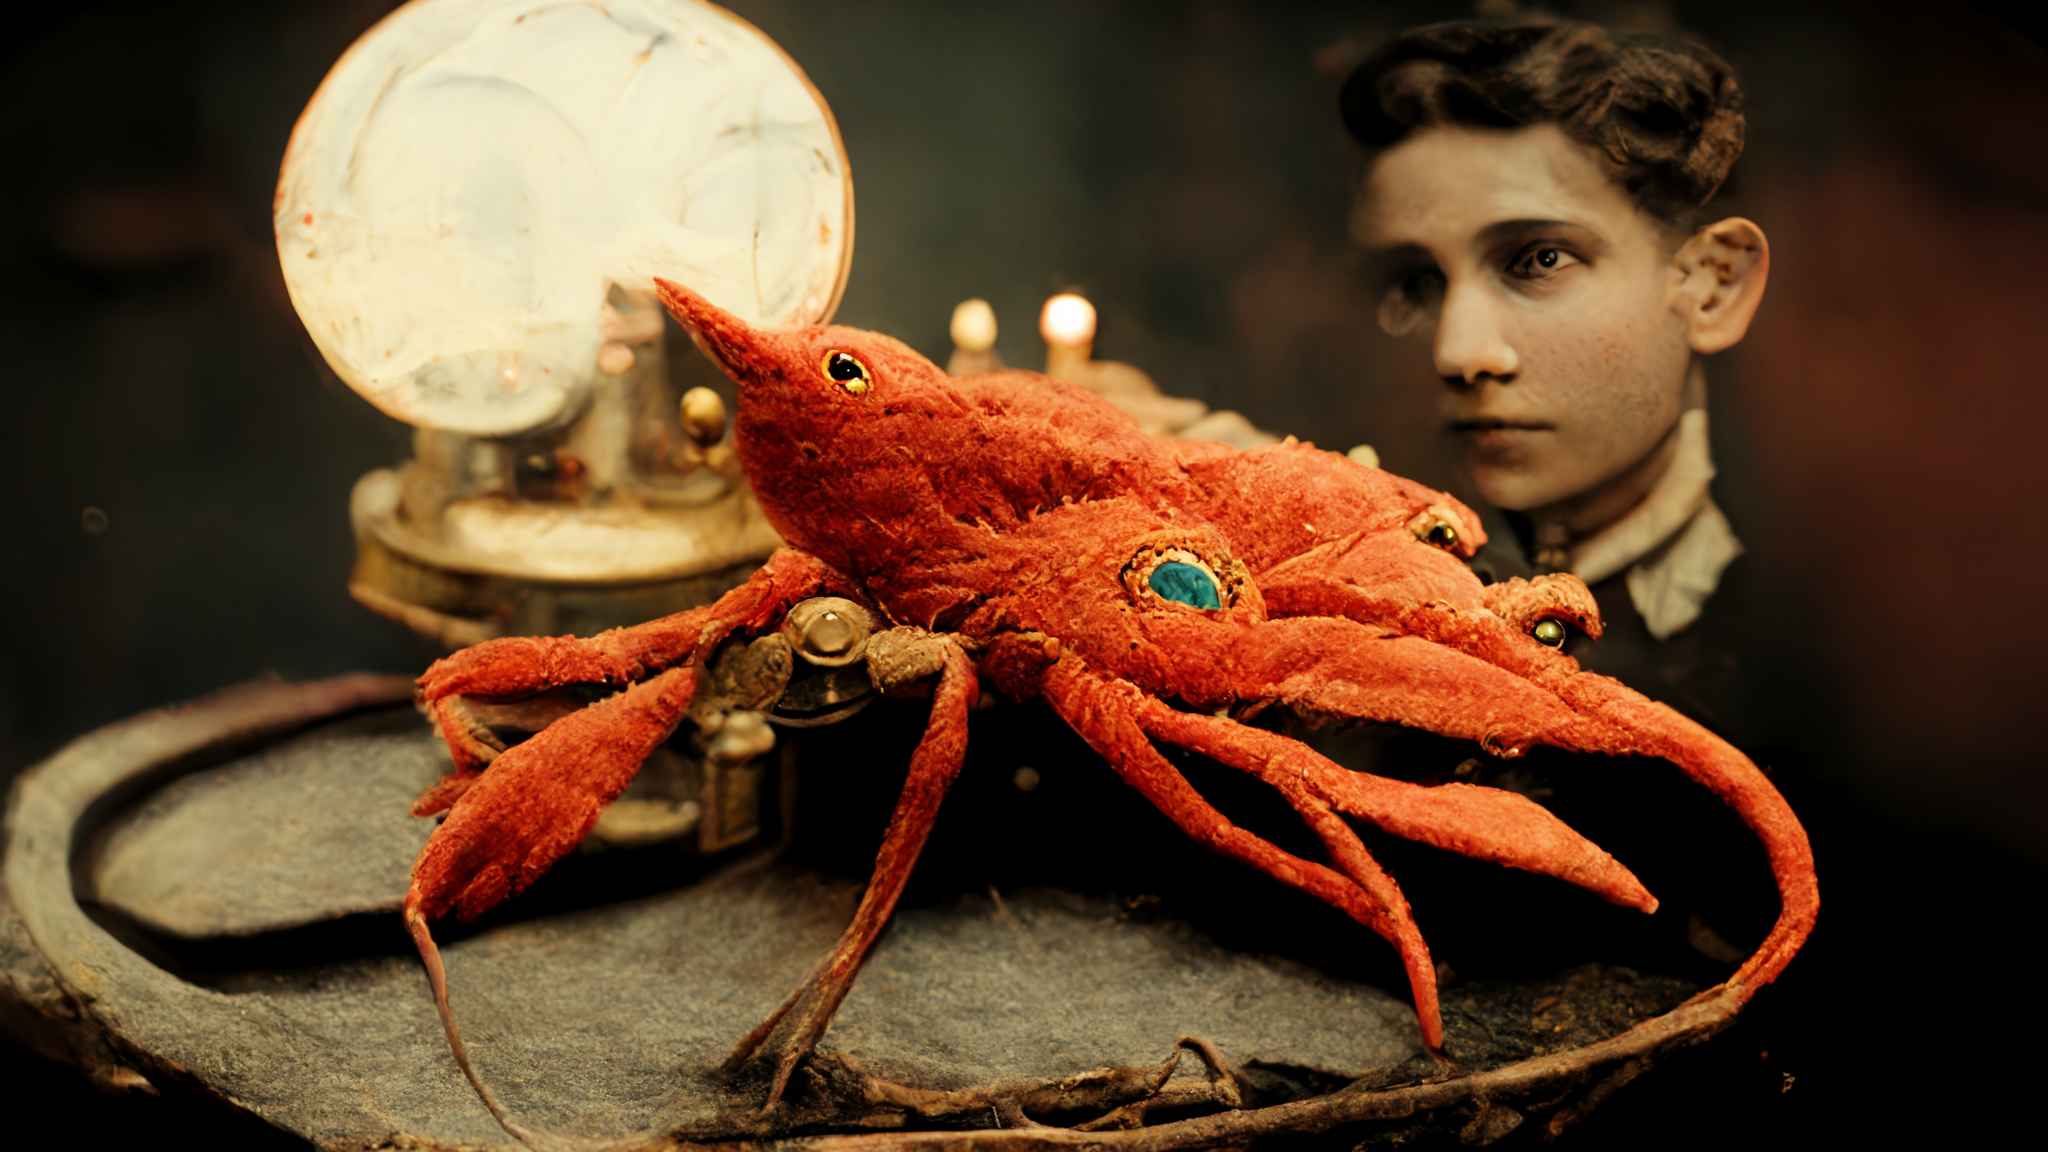 /content/images/2022/11/isaacjohnson_Franz_Kafka_holding_a_bright_glowing_red_crab_dyna_0ec8d629-a4f1-4db6-afb3-66195982248d.png